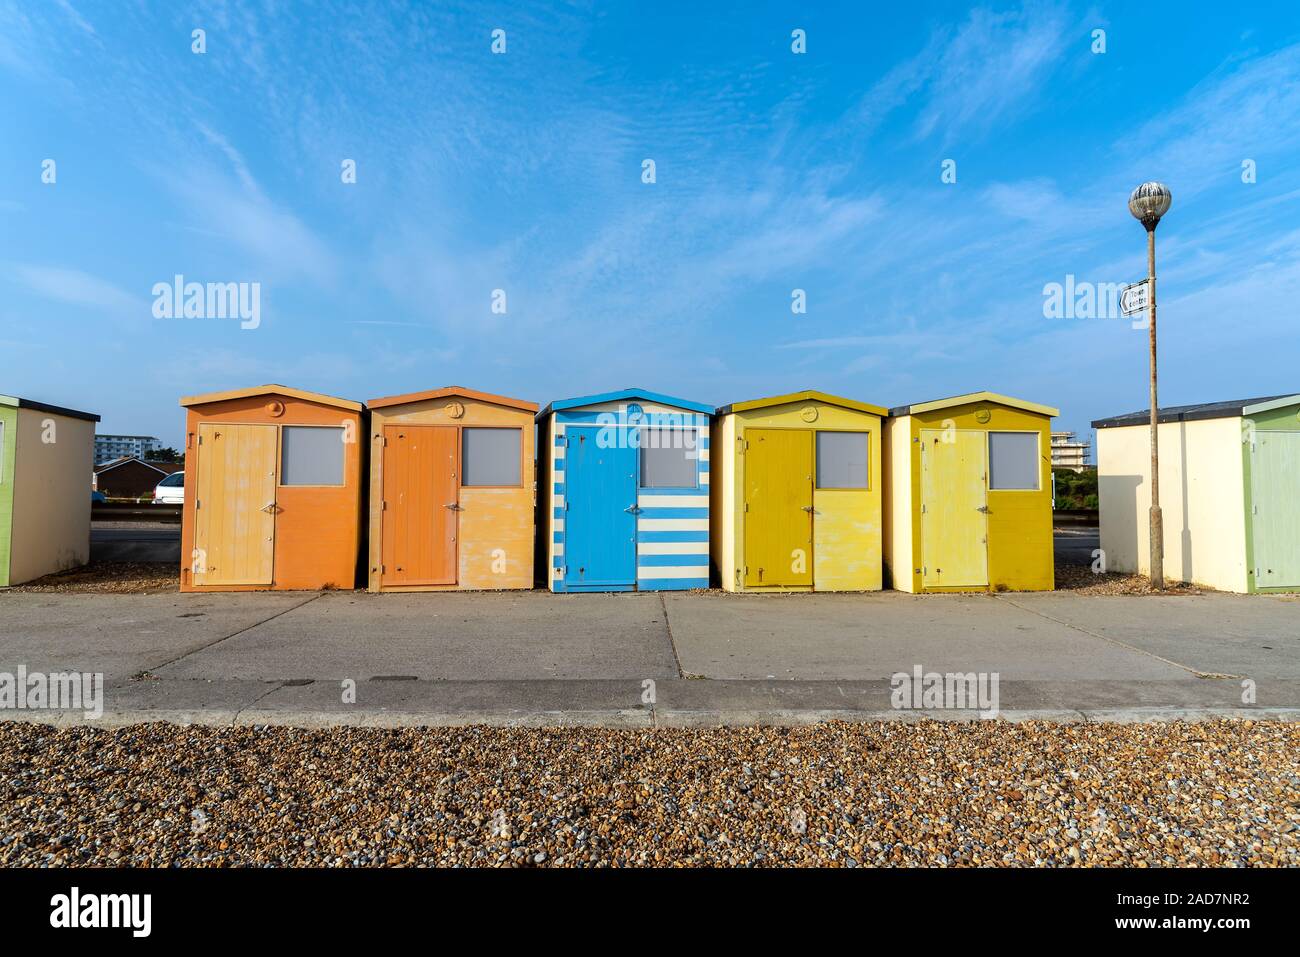 Colorful beach huts seen in Seaford, England Stock Photo